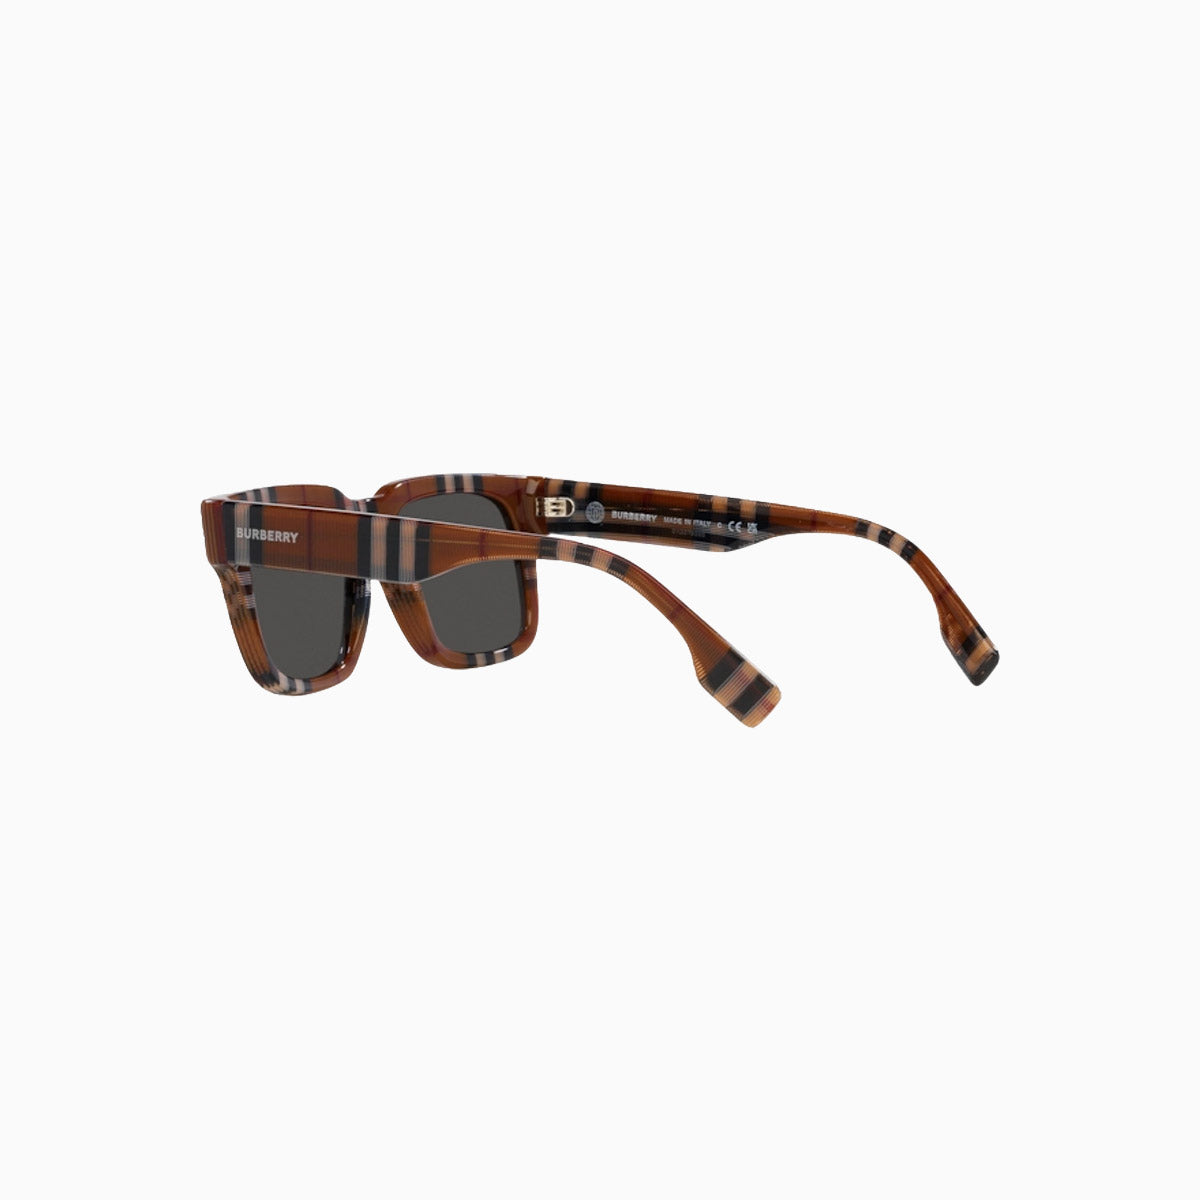 mens-burberry-brown-check-sunglasses-0be4394-396687